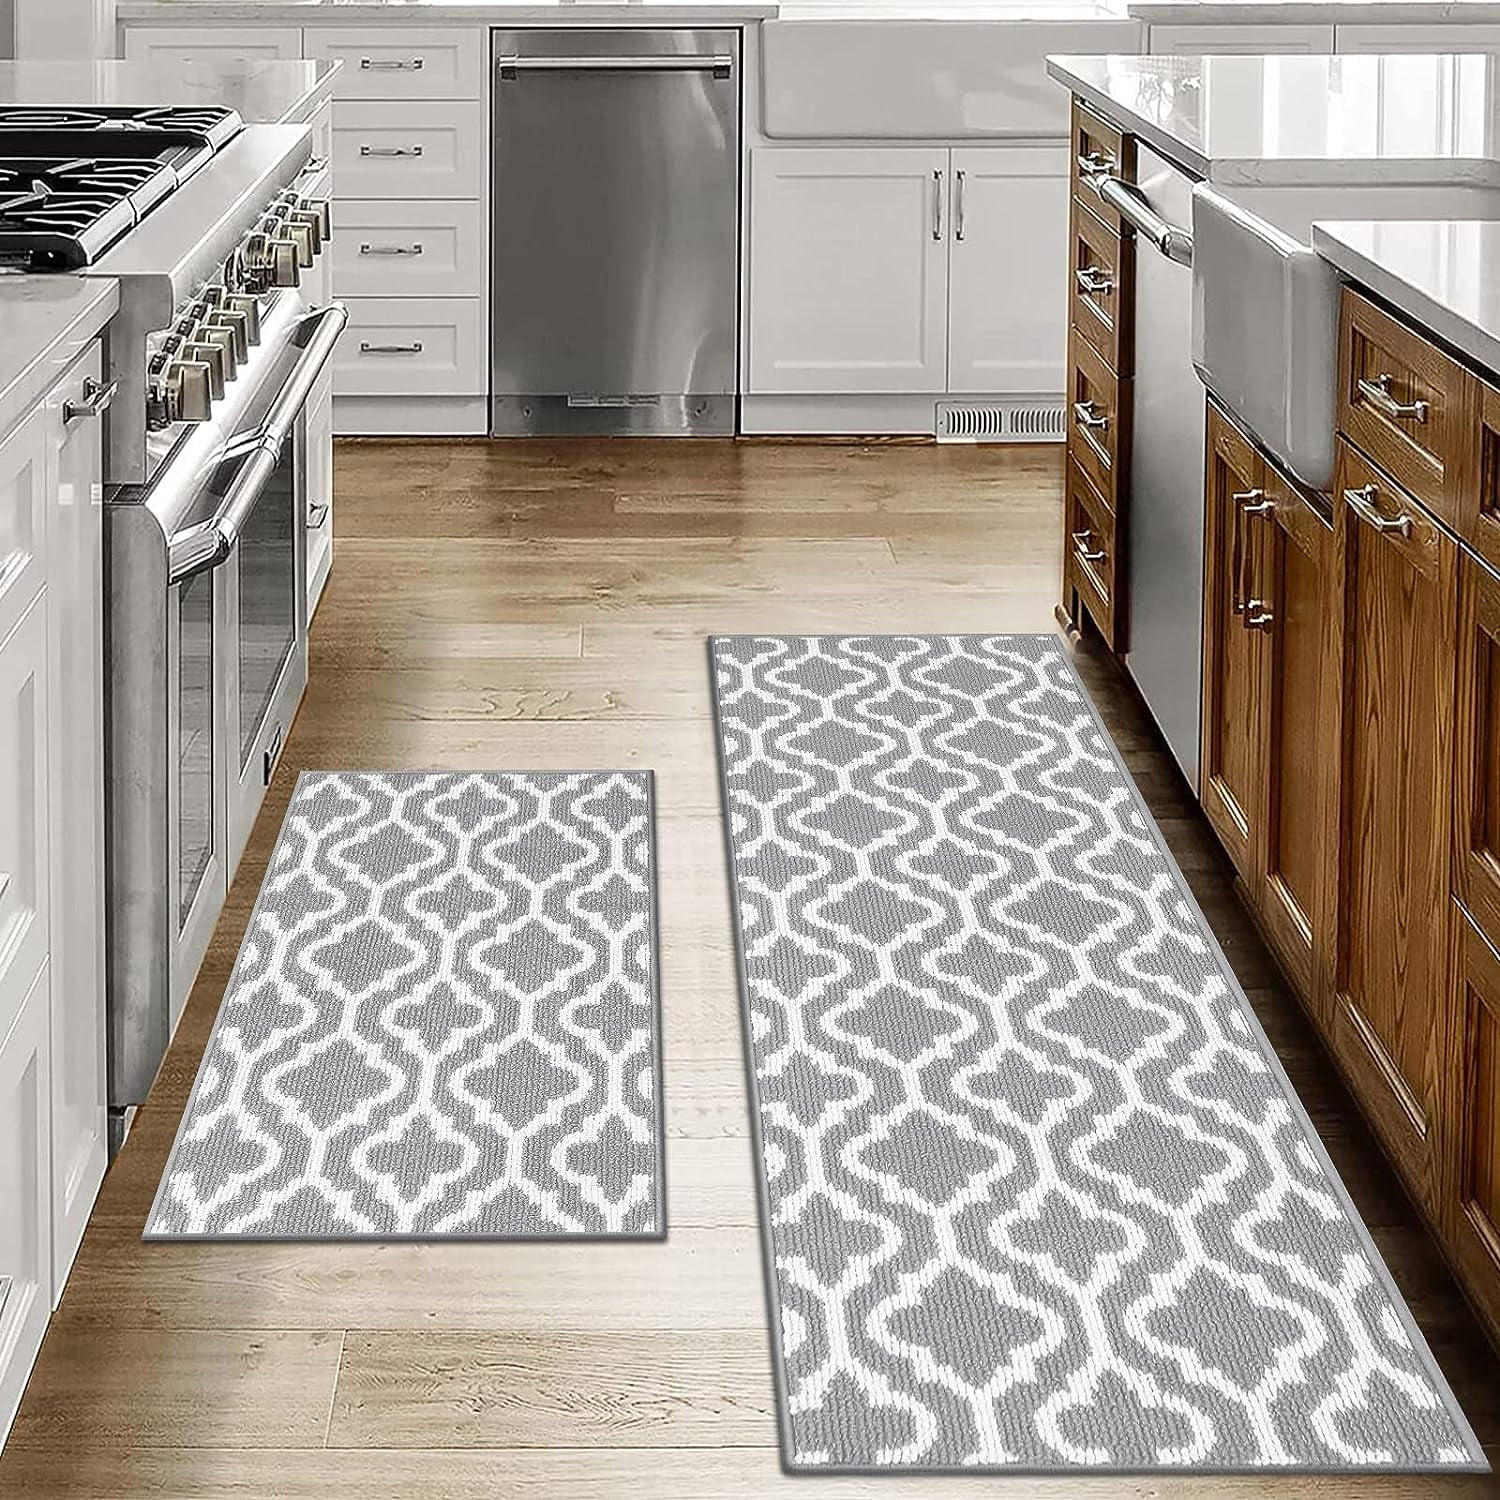 HOMEIDEAS Kitchen Rugs and Mats Set 2 Piece, (30X17+48X17) Grey  Chenille Kitchen Runner Rug for Floor Non Skid Washable, Soft, Absorbent,  Long